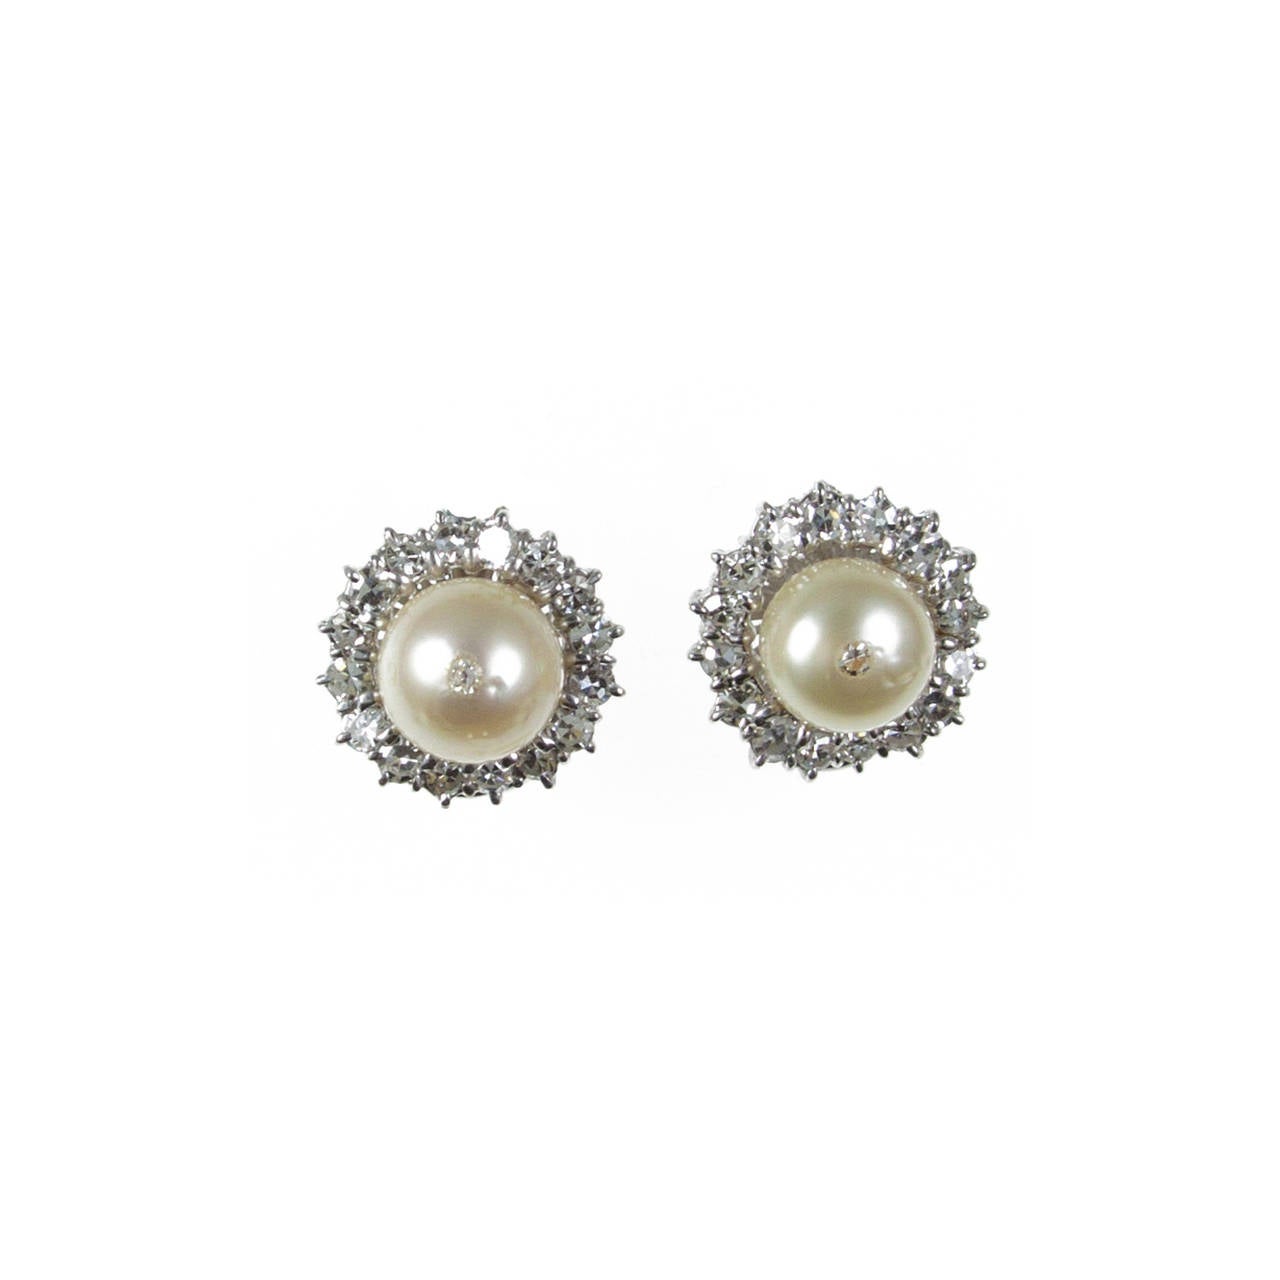 Natural Button Pearl and Diamond Earrings in White Gold.
Designed by Amyn The Jeweler.
The Natural Pearls are GIA certified as Natural Saltwater.
Natural Pearls are getting extinct and specially large sizes are hard to get.
Natural Pearls are